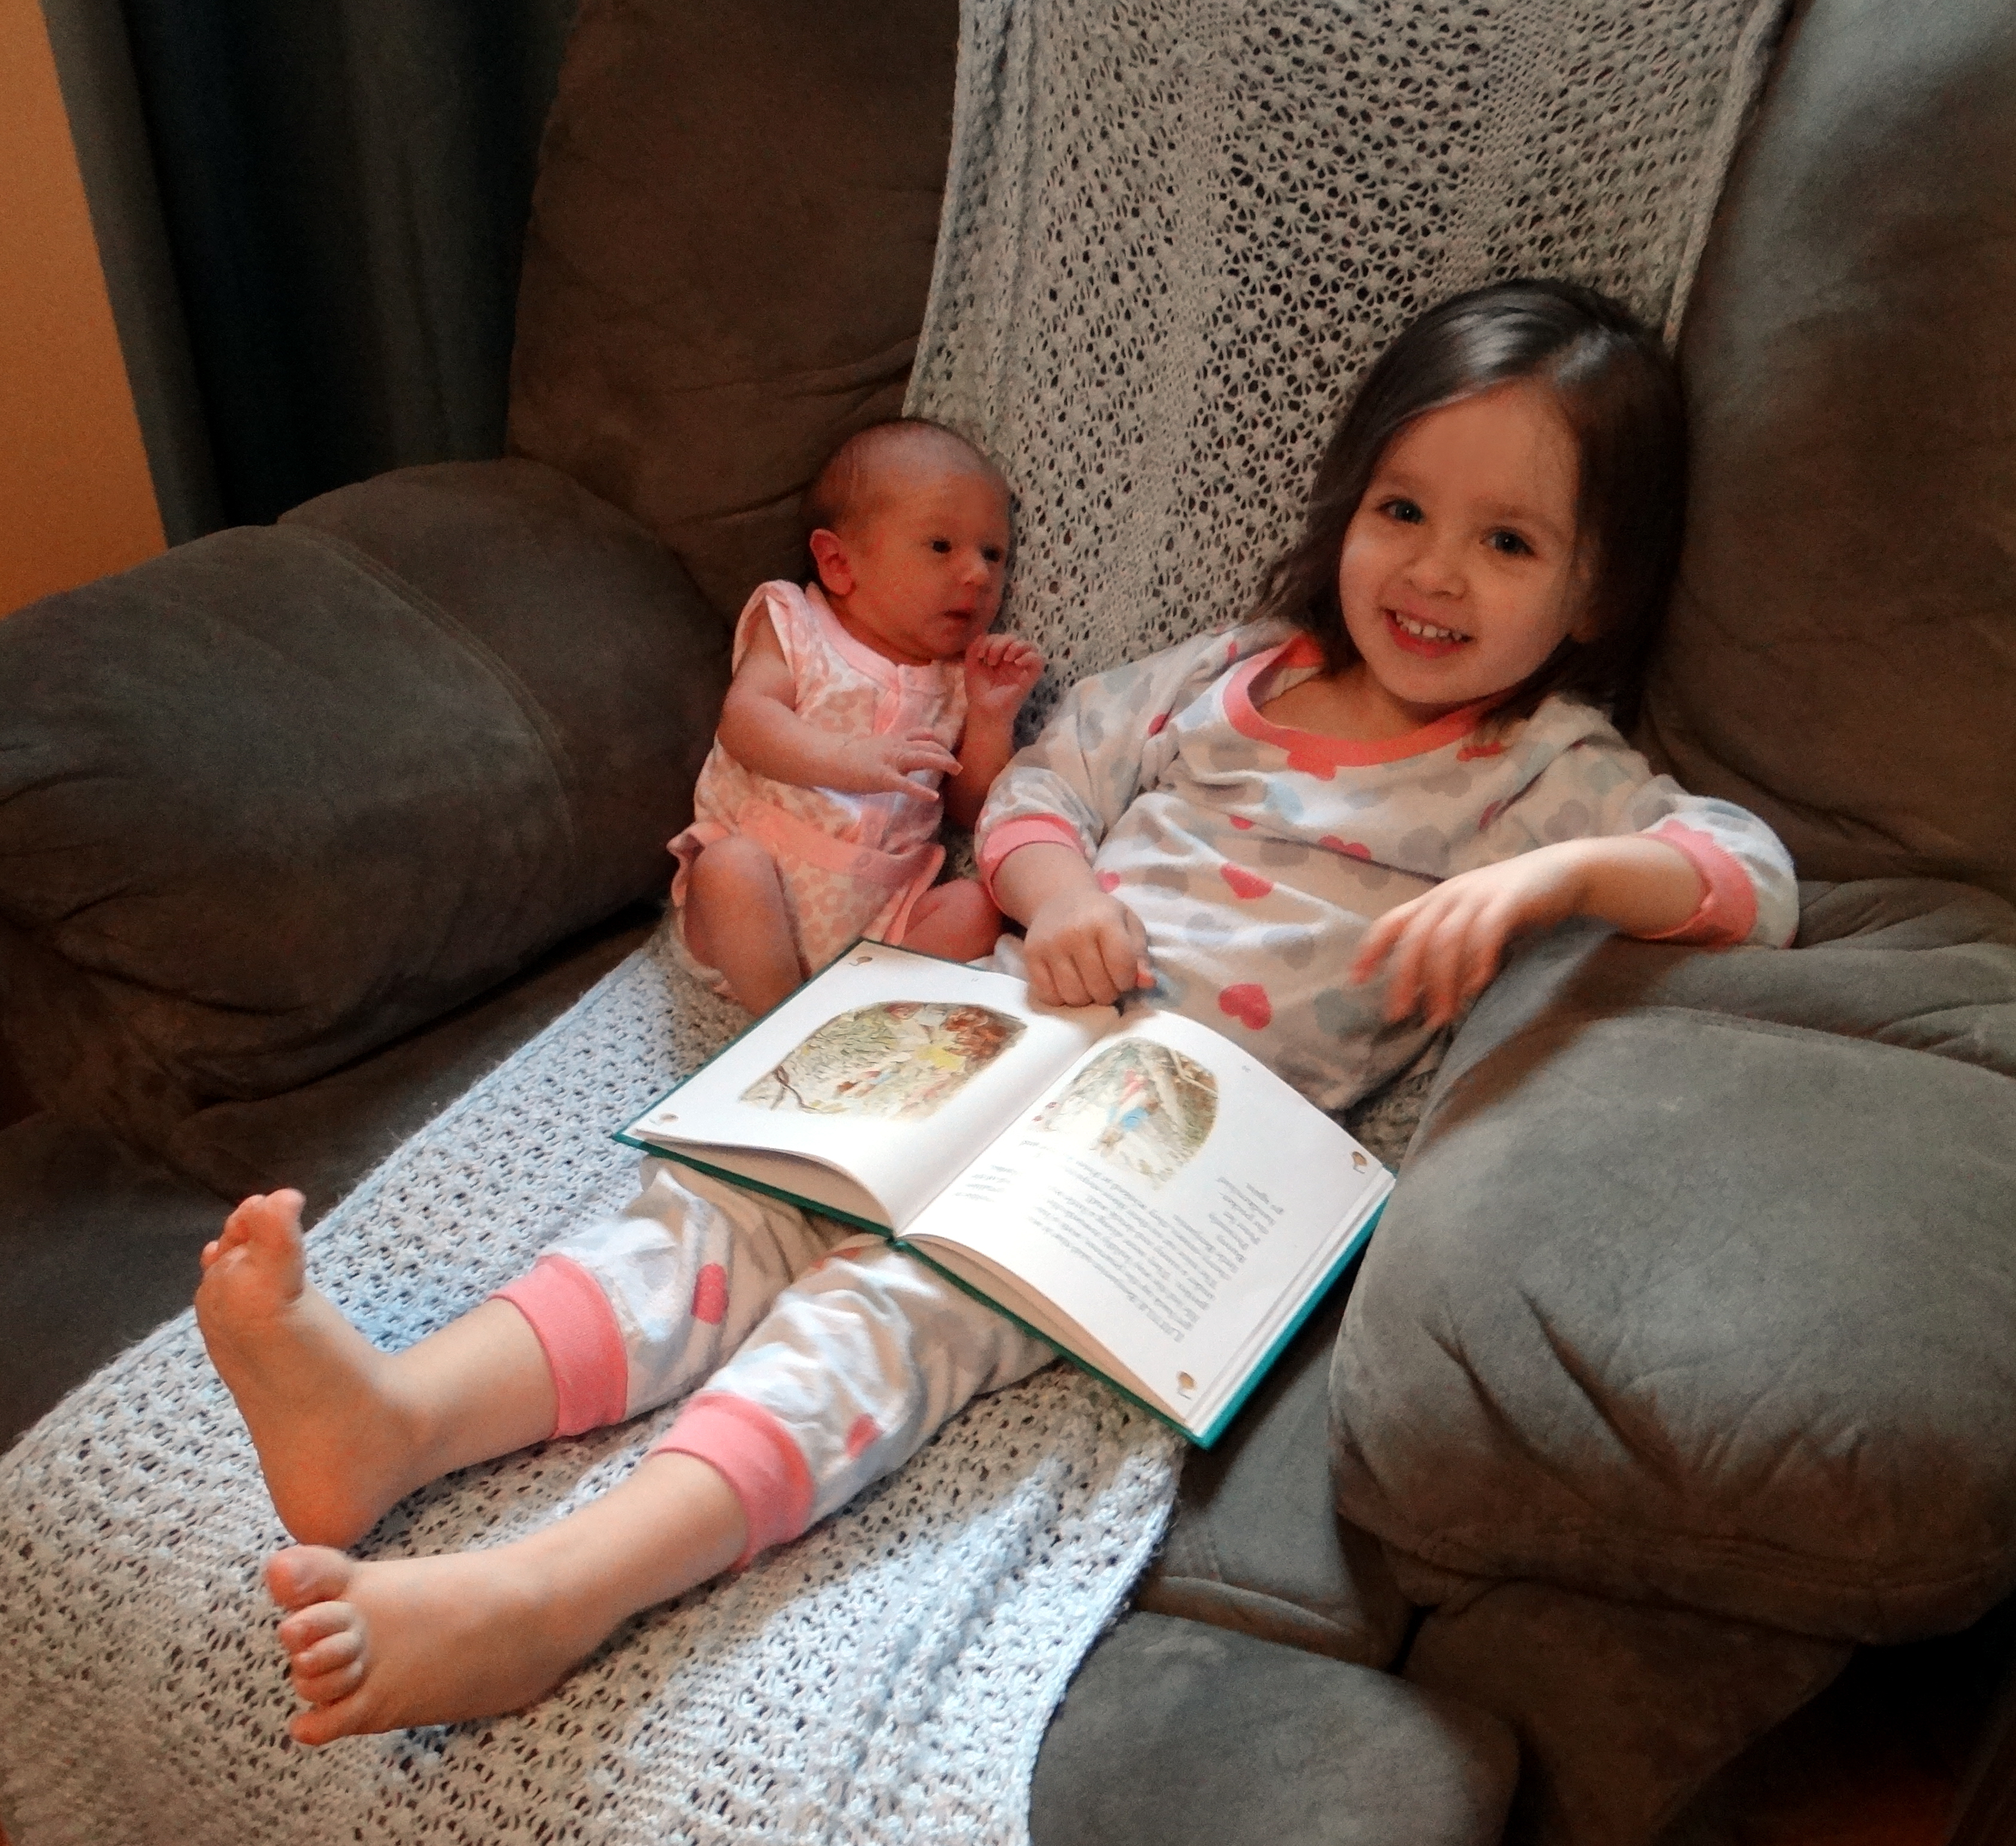 Peachy reading to her baby sister